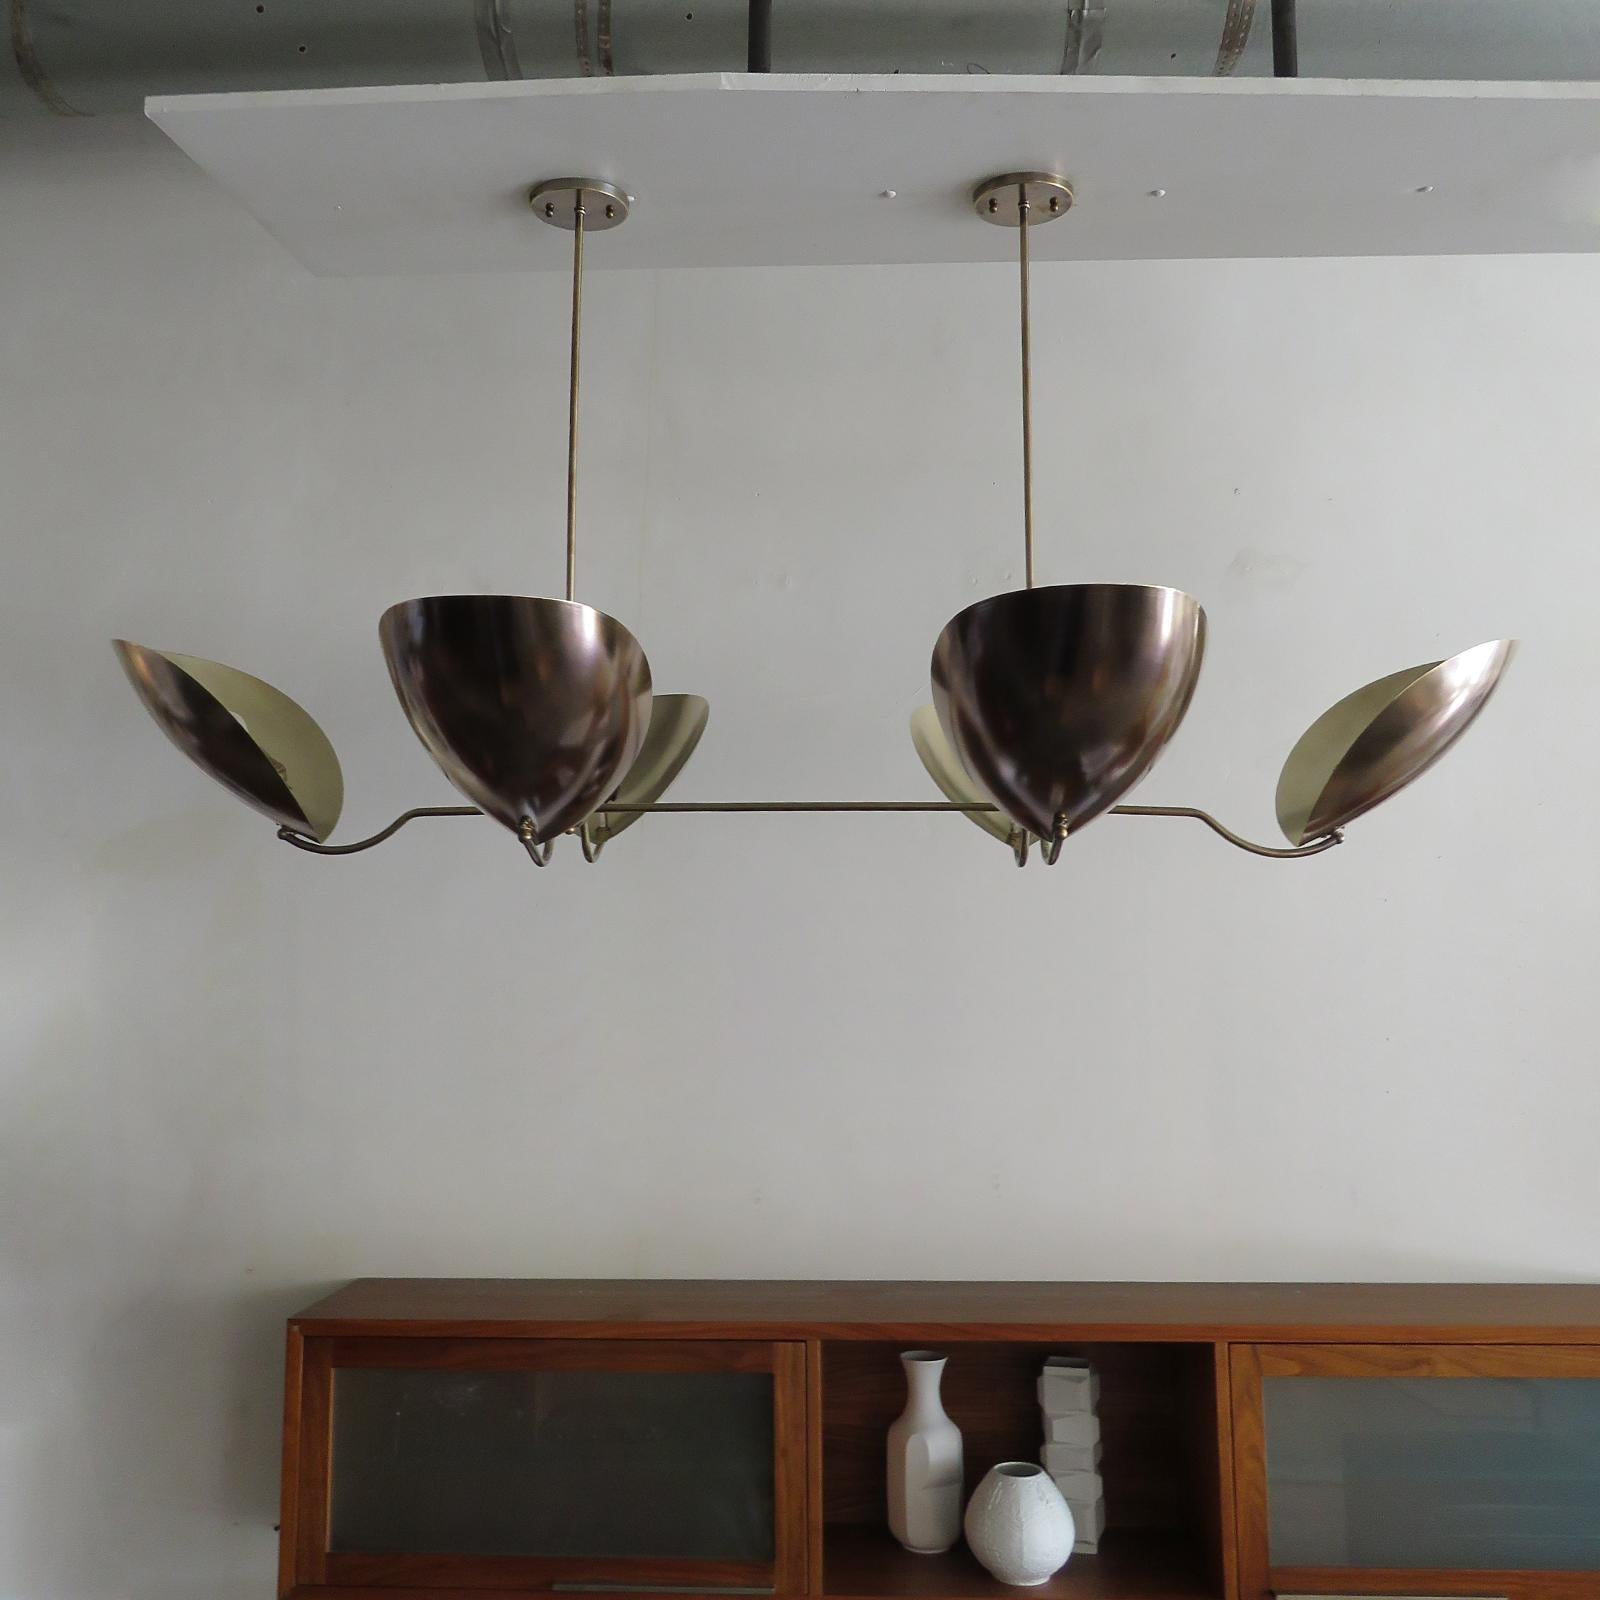 Elegant Chiton-6 chandelier, designed by Gallery L7, handcrafted and finished in Los Angeles from American brass. Reminiscent of stag beetle armor, in an aged raw brass finish, overall height can be customized. Six E26 sockets per fixture, max.